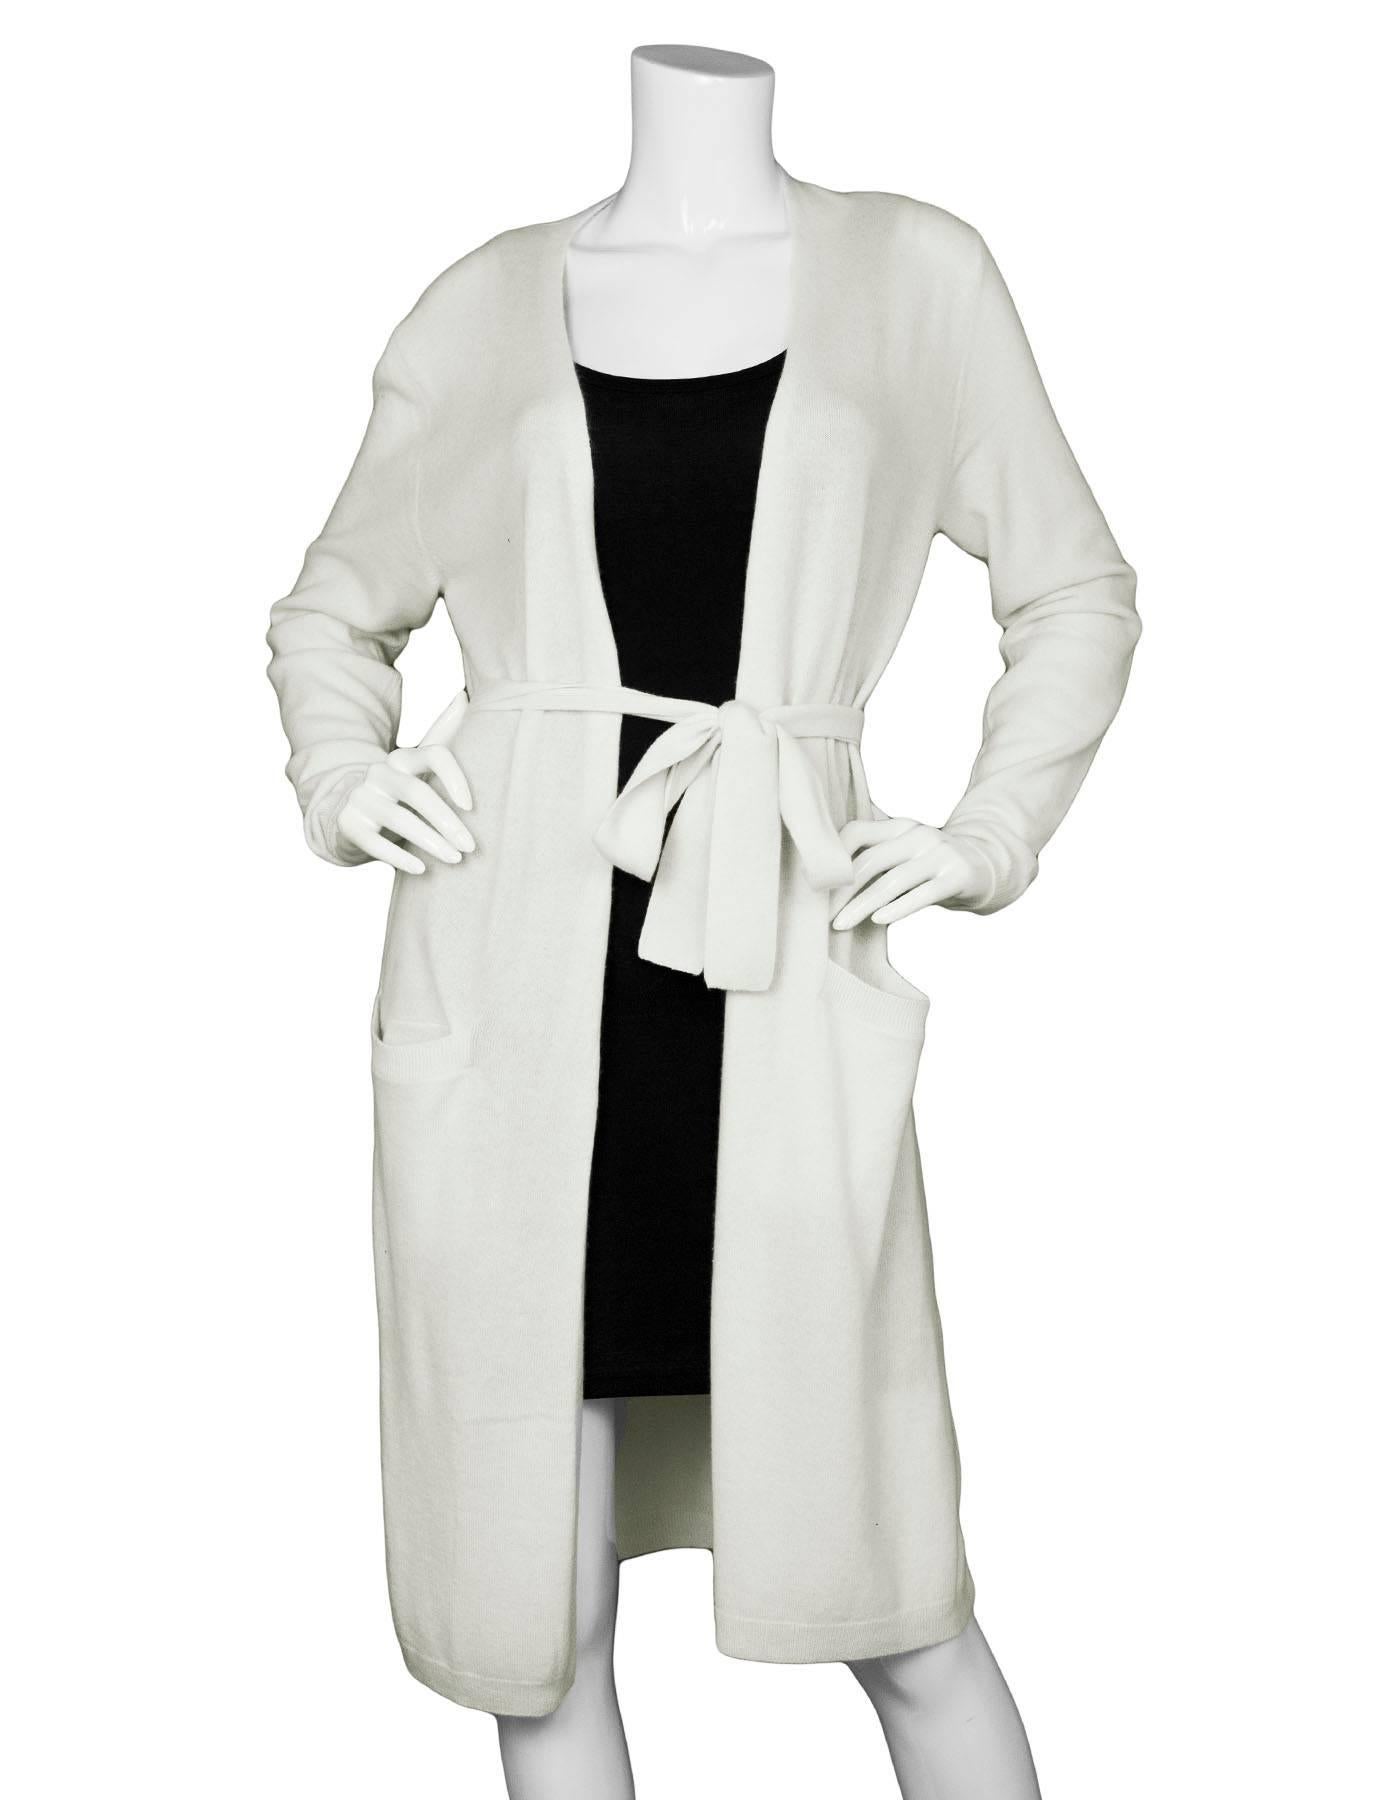 Theory Cream Cashmere Long Open Cardigan 
Features optional waist tie and one slit on each side of exterior

Made In: China
Color: Cream
Composition: 100% cashmere
Lining: None
Closure/Opening: Open front with optional waist tie closure
Exterior